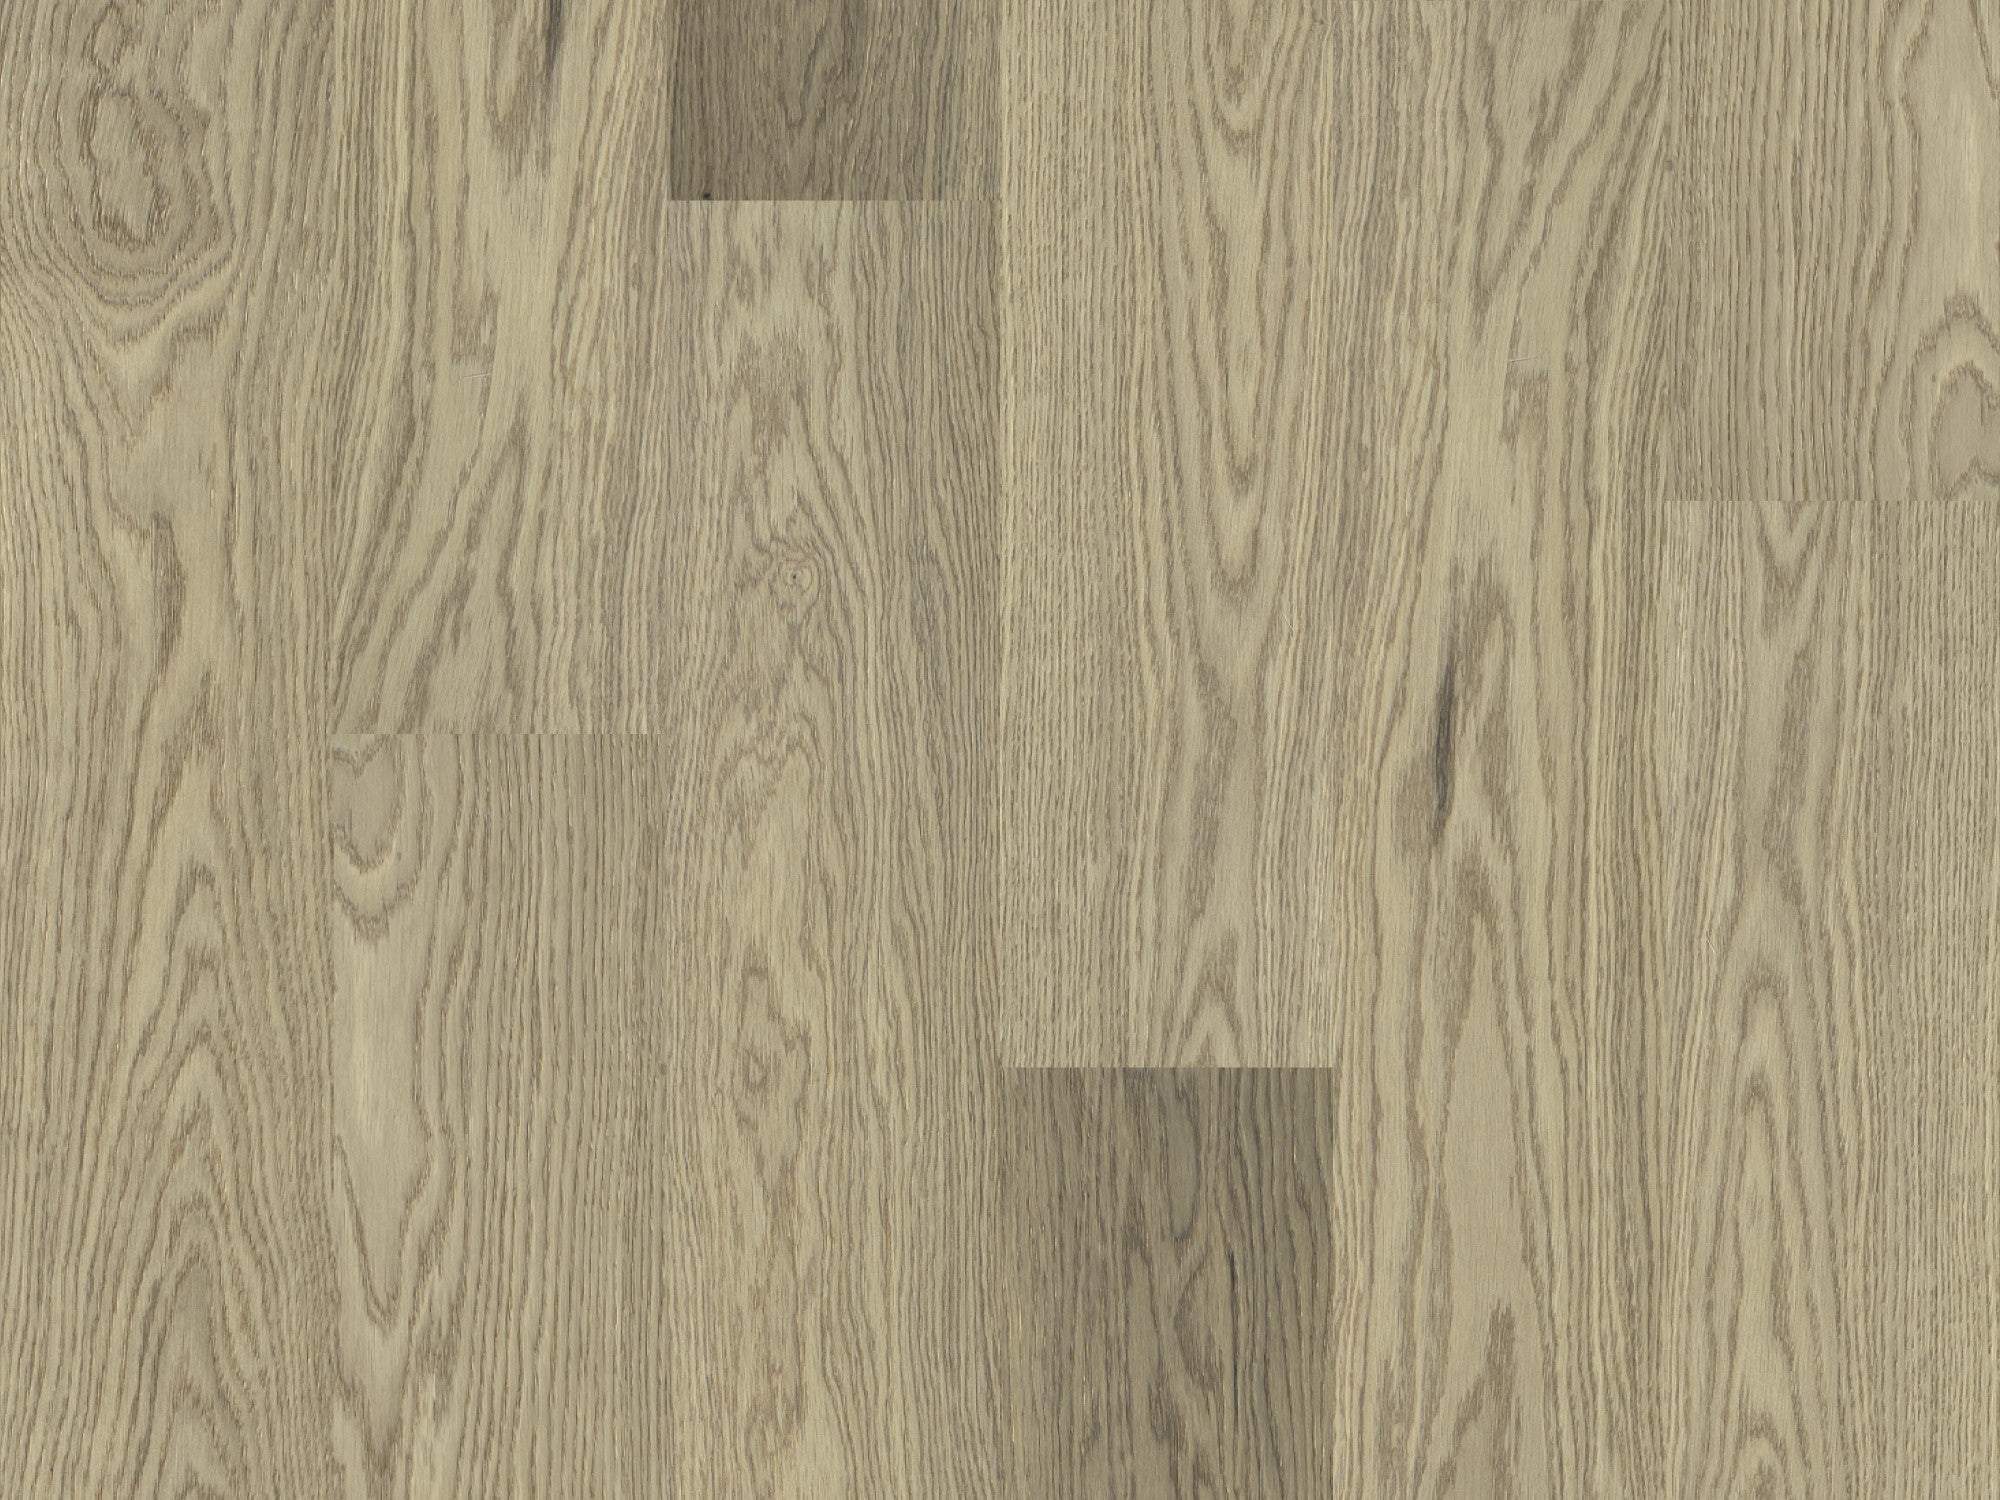 duchateau the guild lineage hannah european oak engineered hardnatural wood floor uv lacquer finish for interior use distributed by surface group international